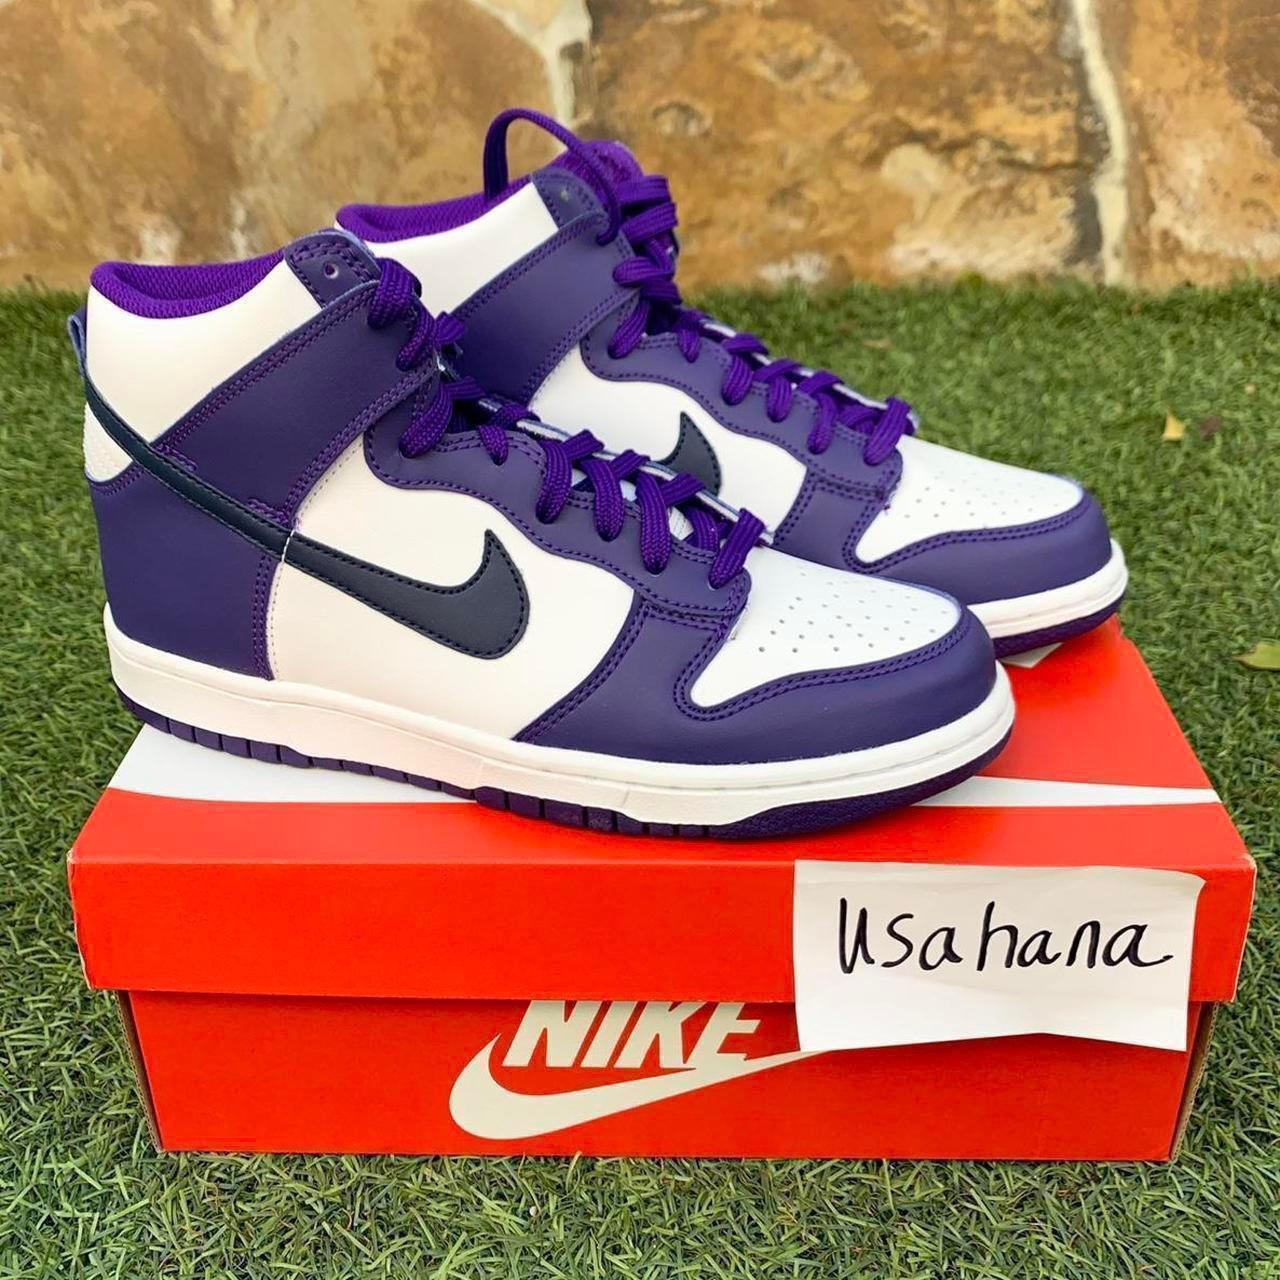 Product Image 2 - Nike dunk high GS purple